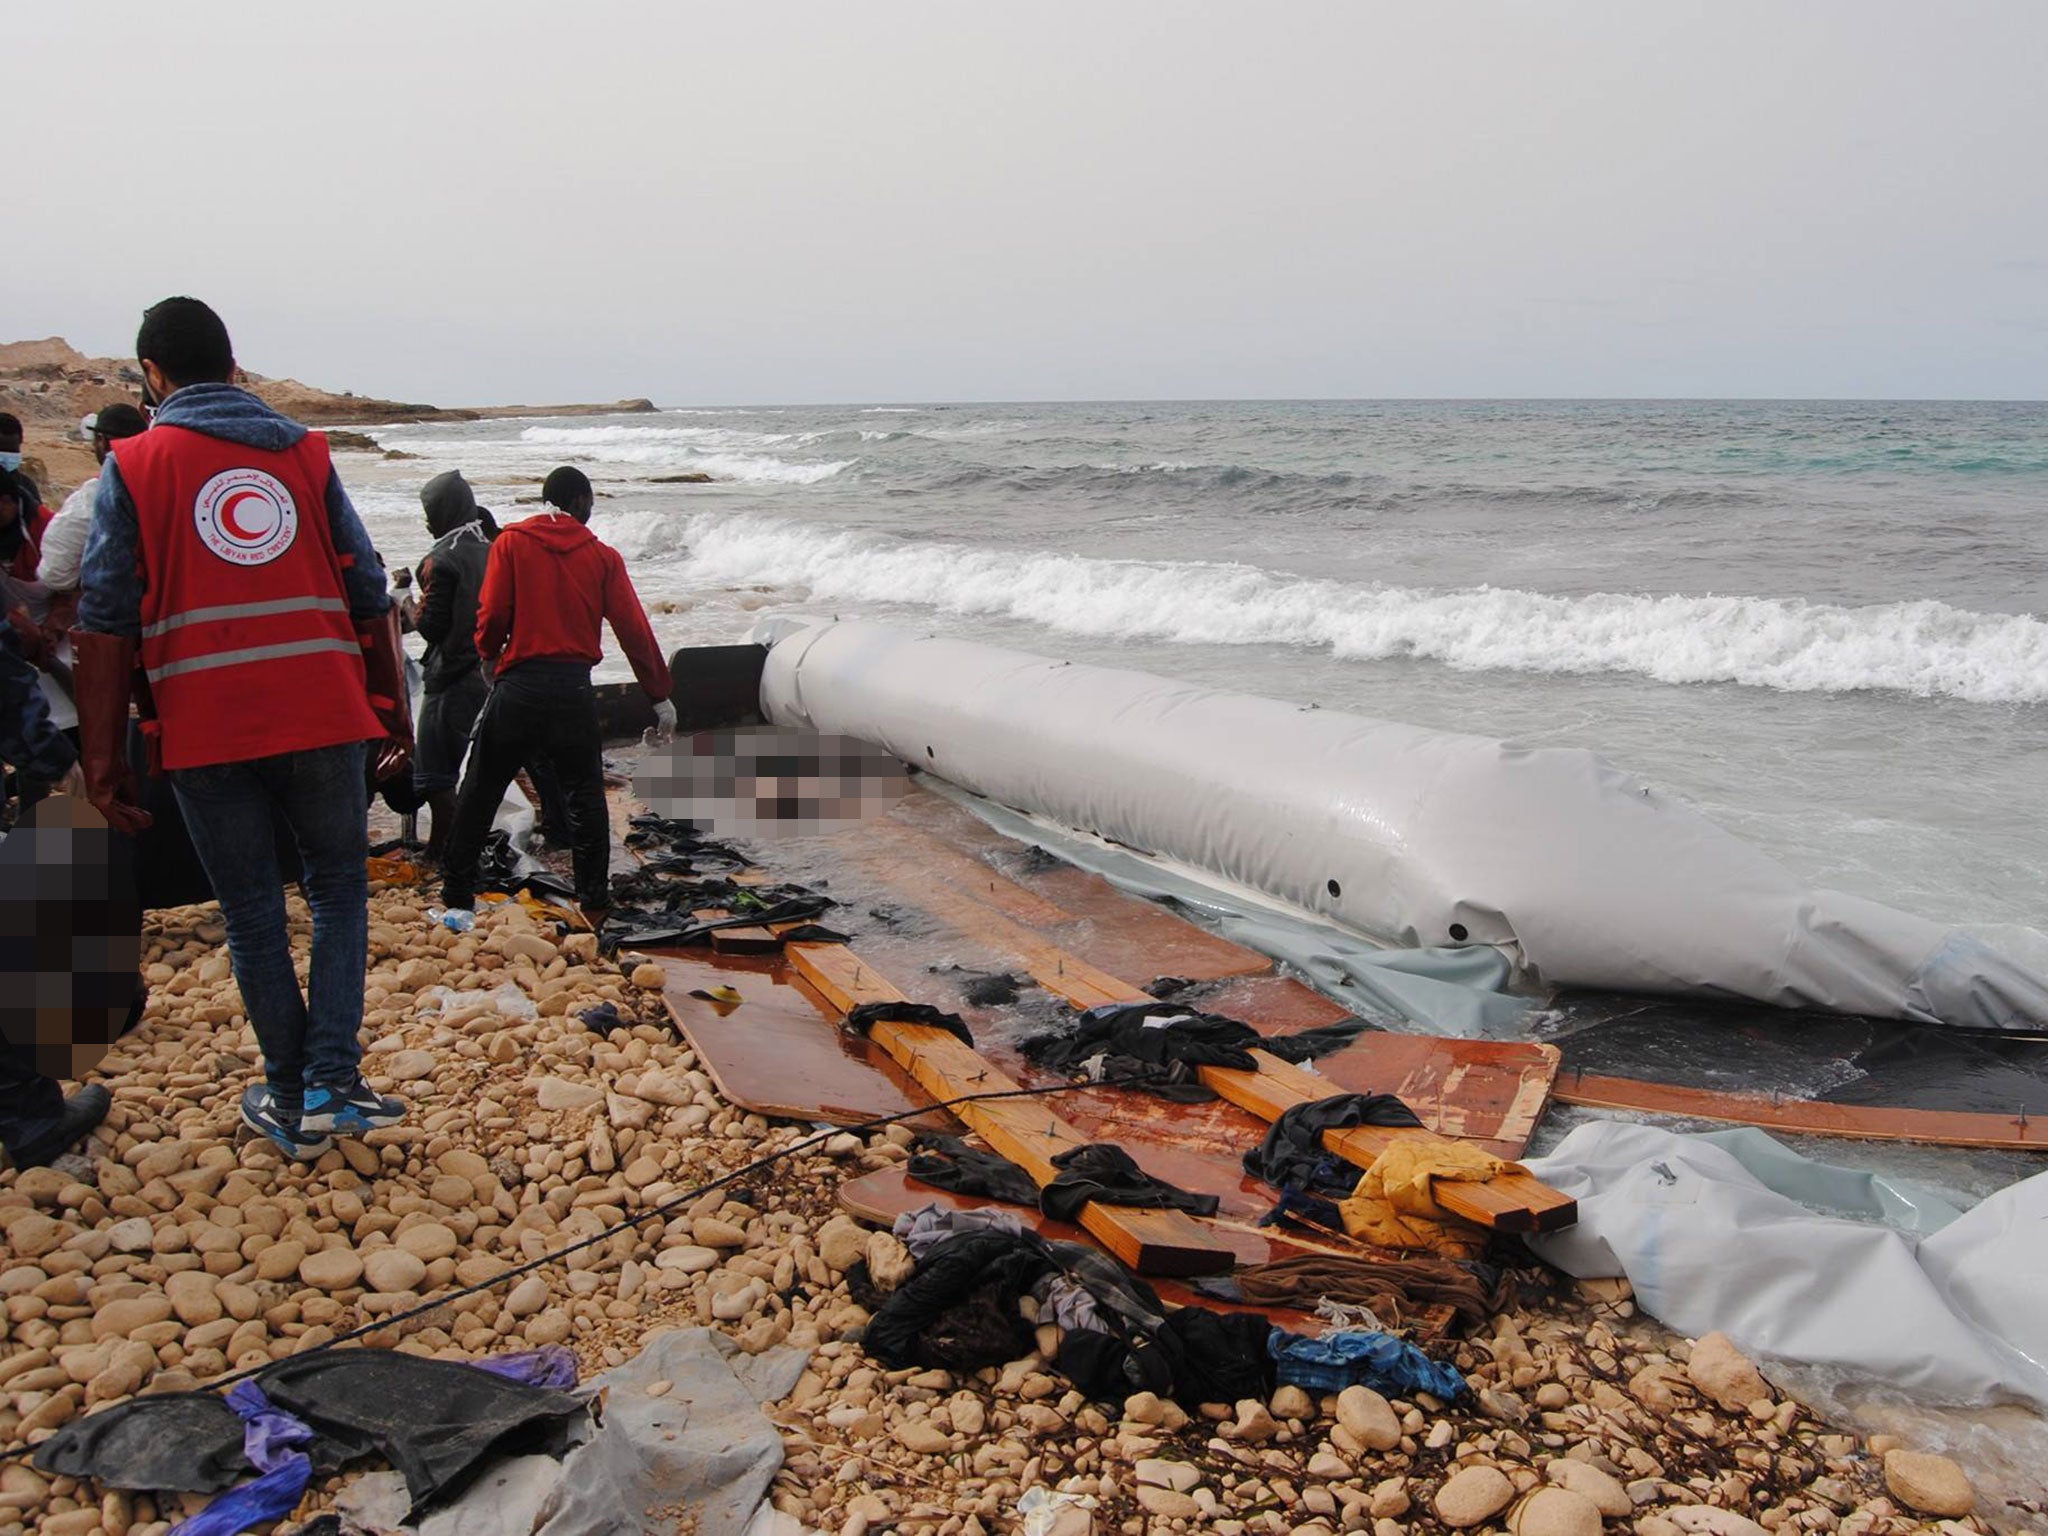 The bodies of 74 migrants were washed ashore near Zawiyah in another boat disaster in February